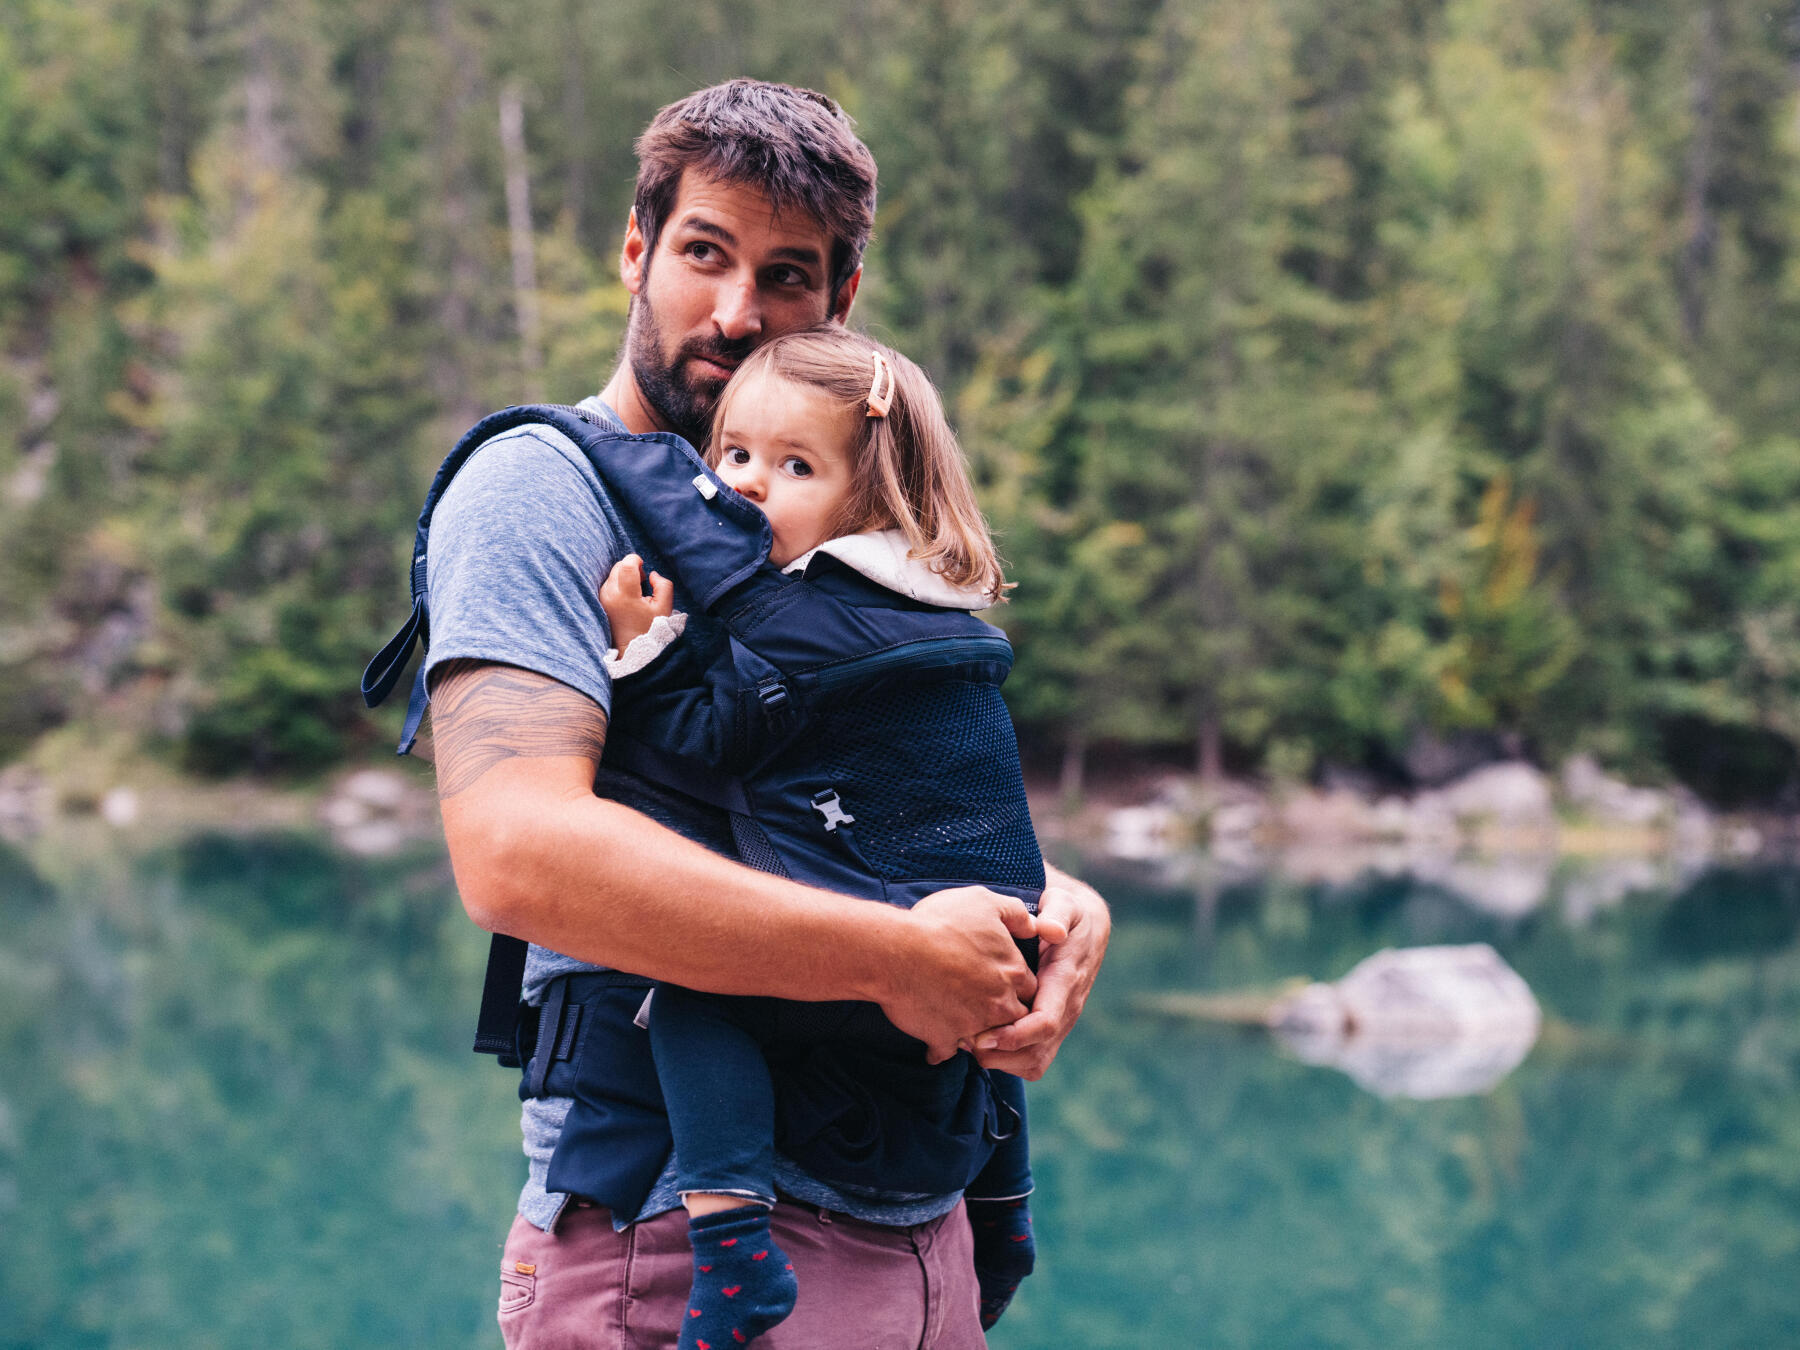 How to dress a child that is being carried during a hike?